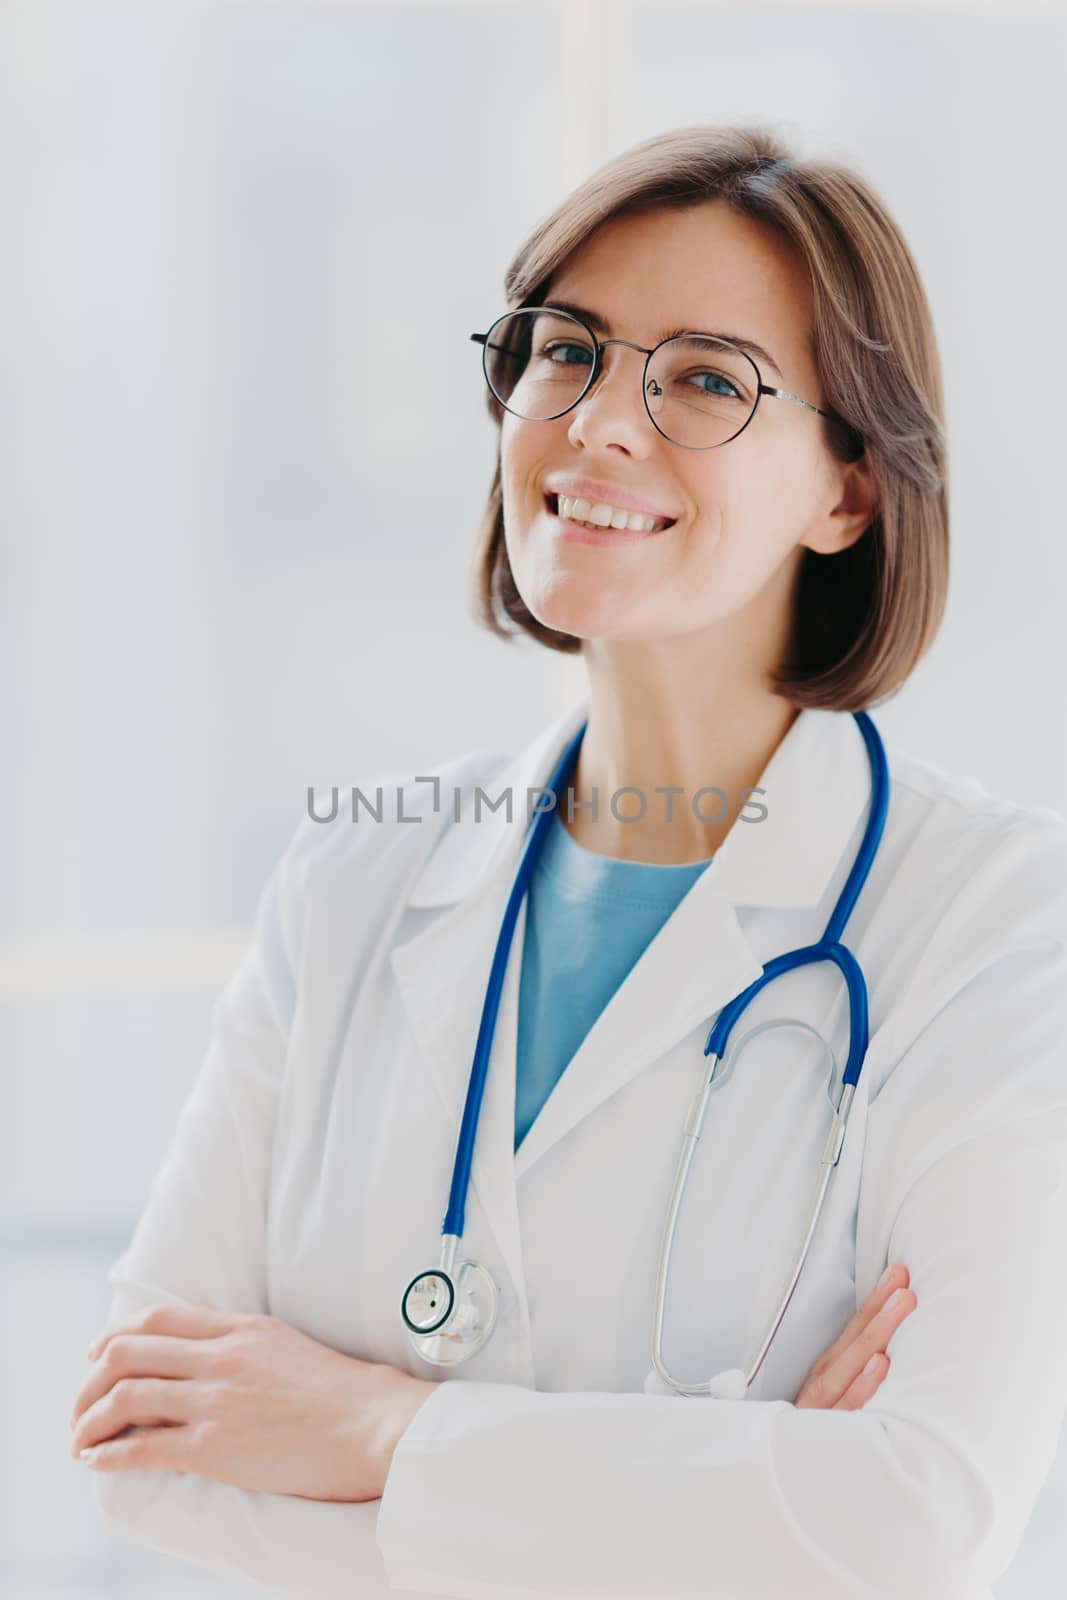 Close up portrait of short haired female general practitioner stands with smile and arms crossed, uses stethoscope, enjoys work, poses against white background. People, mediccare and treatment concept